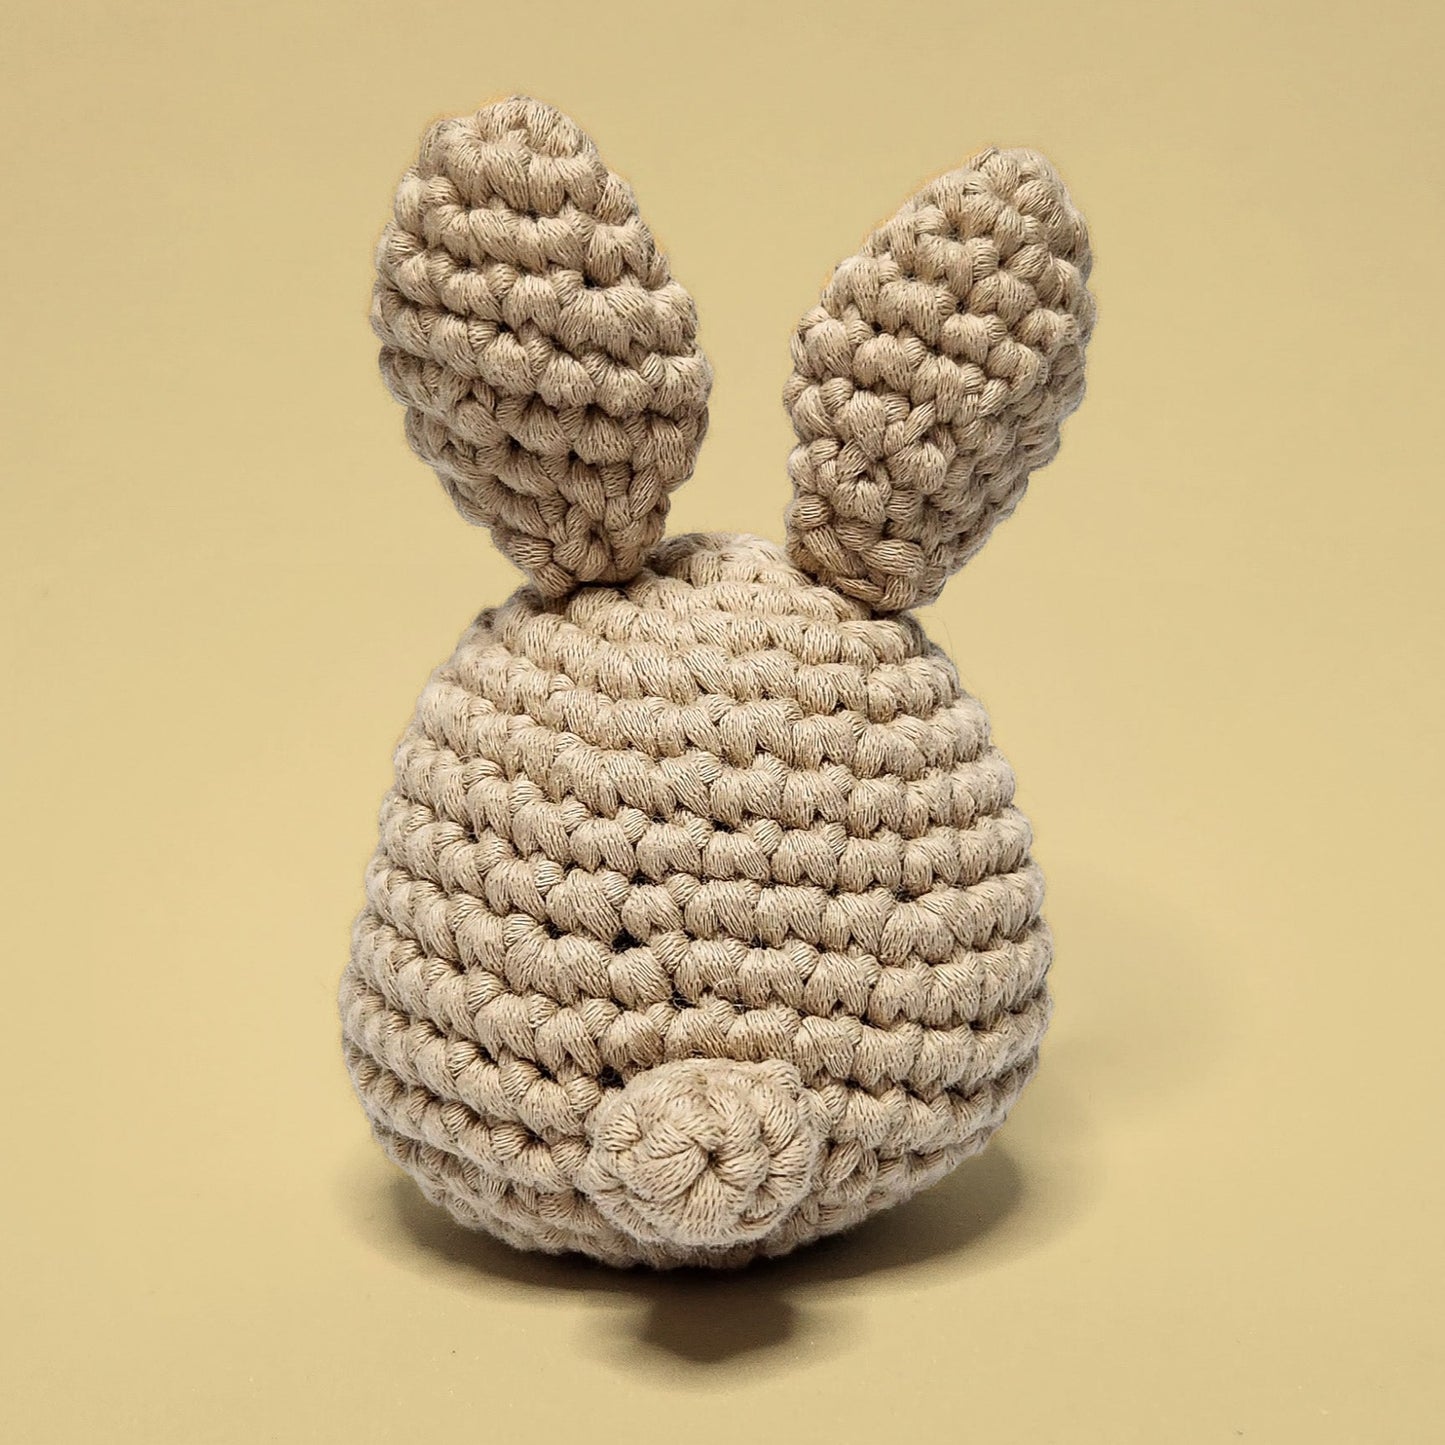 Brown bunny crochet amigurumi, a completed project from our beginner-friendly crochet kit. Handmade with our yarn, perfect for people who are looking to learn crocheting. Back view.